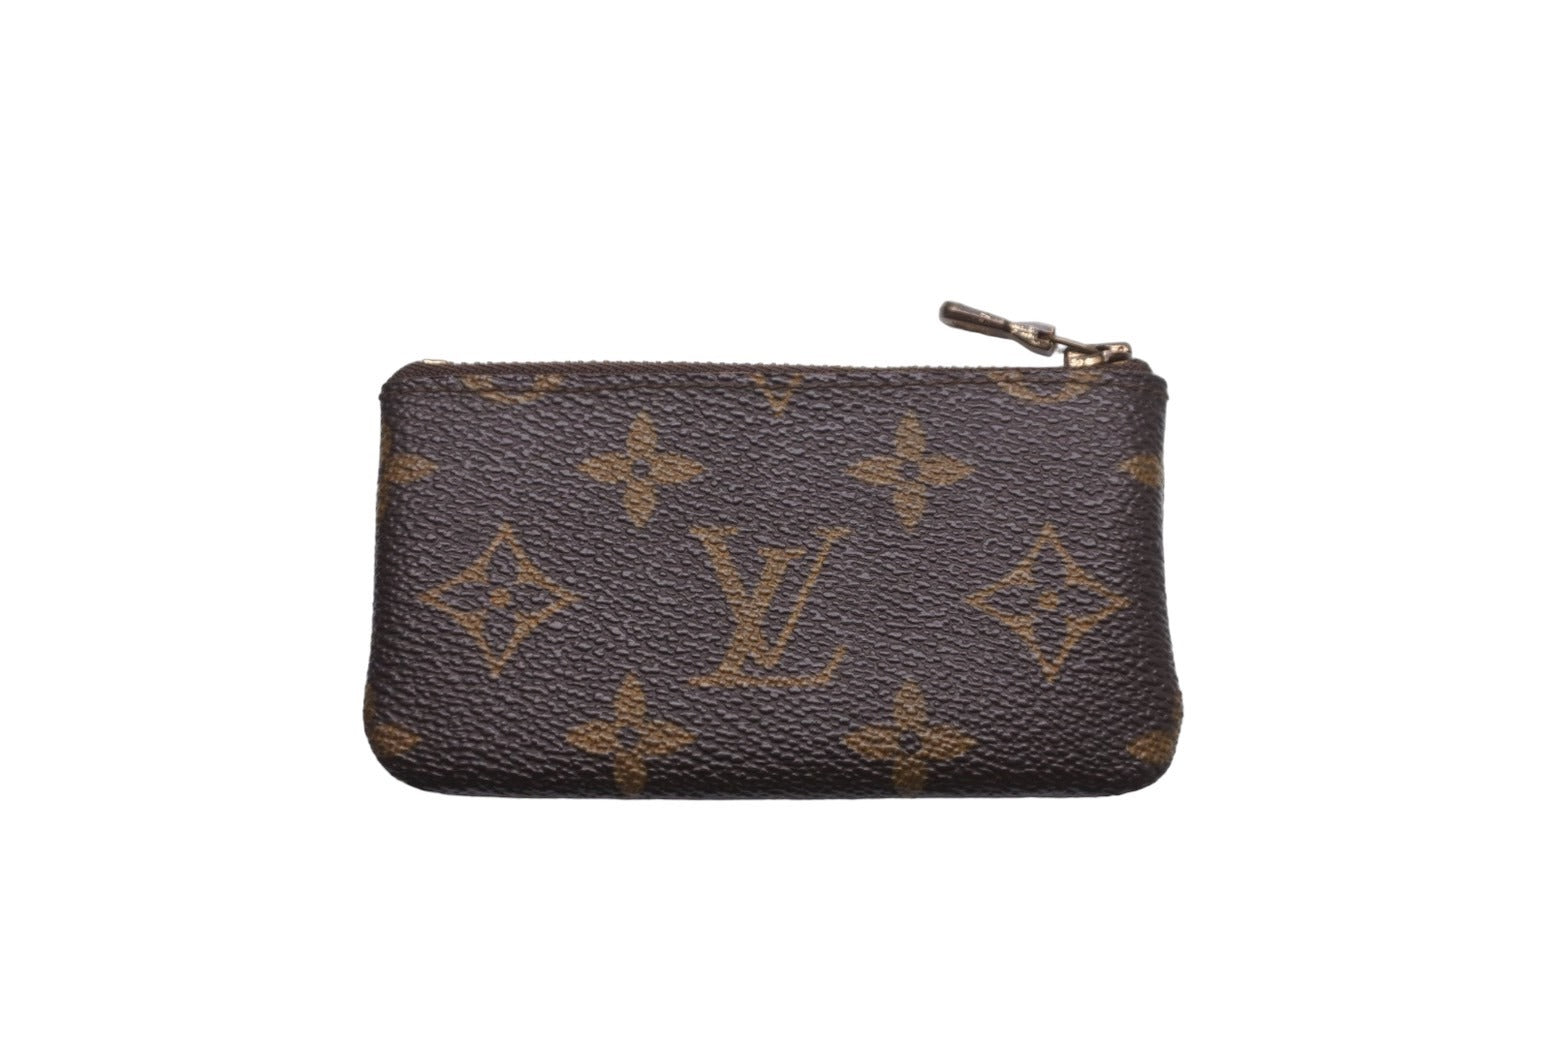 LOUIS VUITTON ルイヴィトン ポシェットクレ コインケース カード 